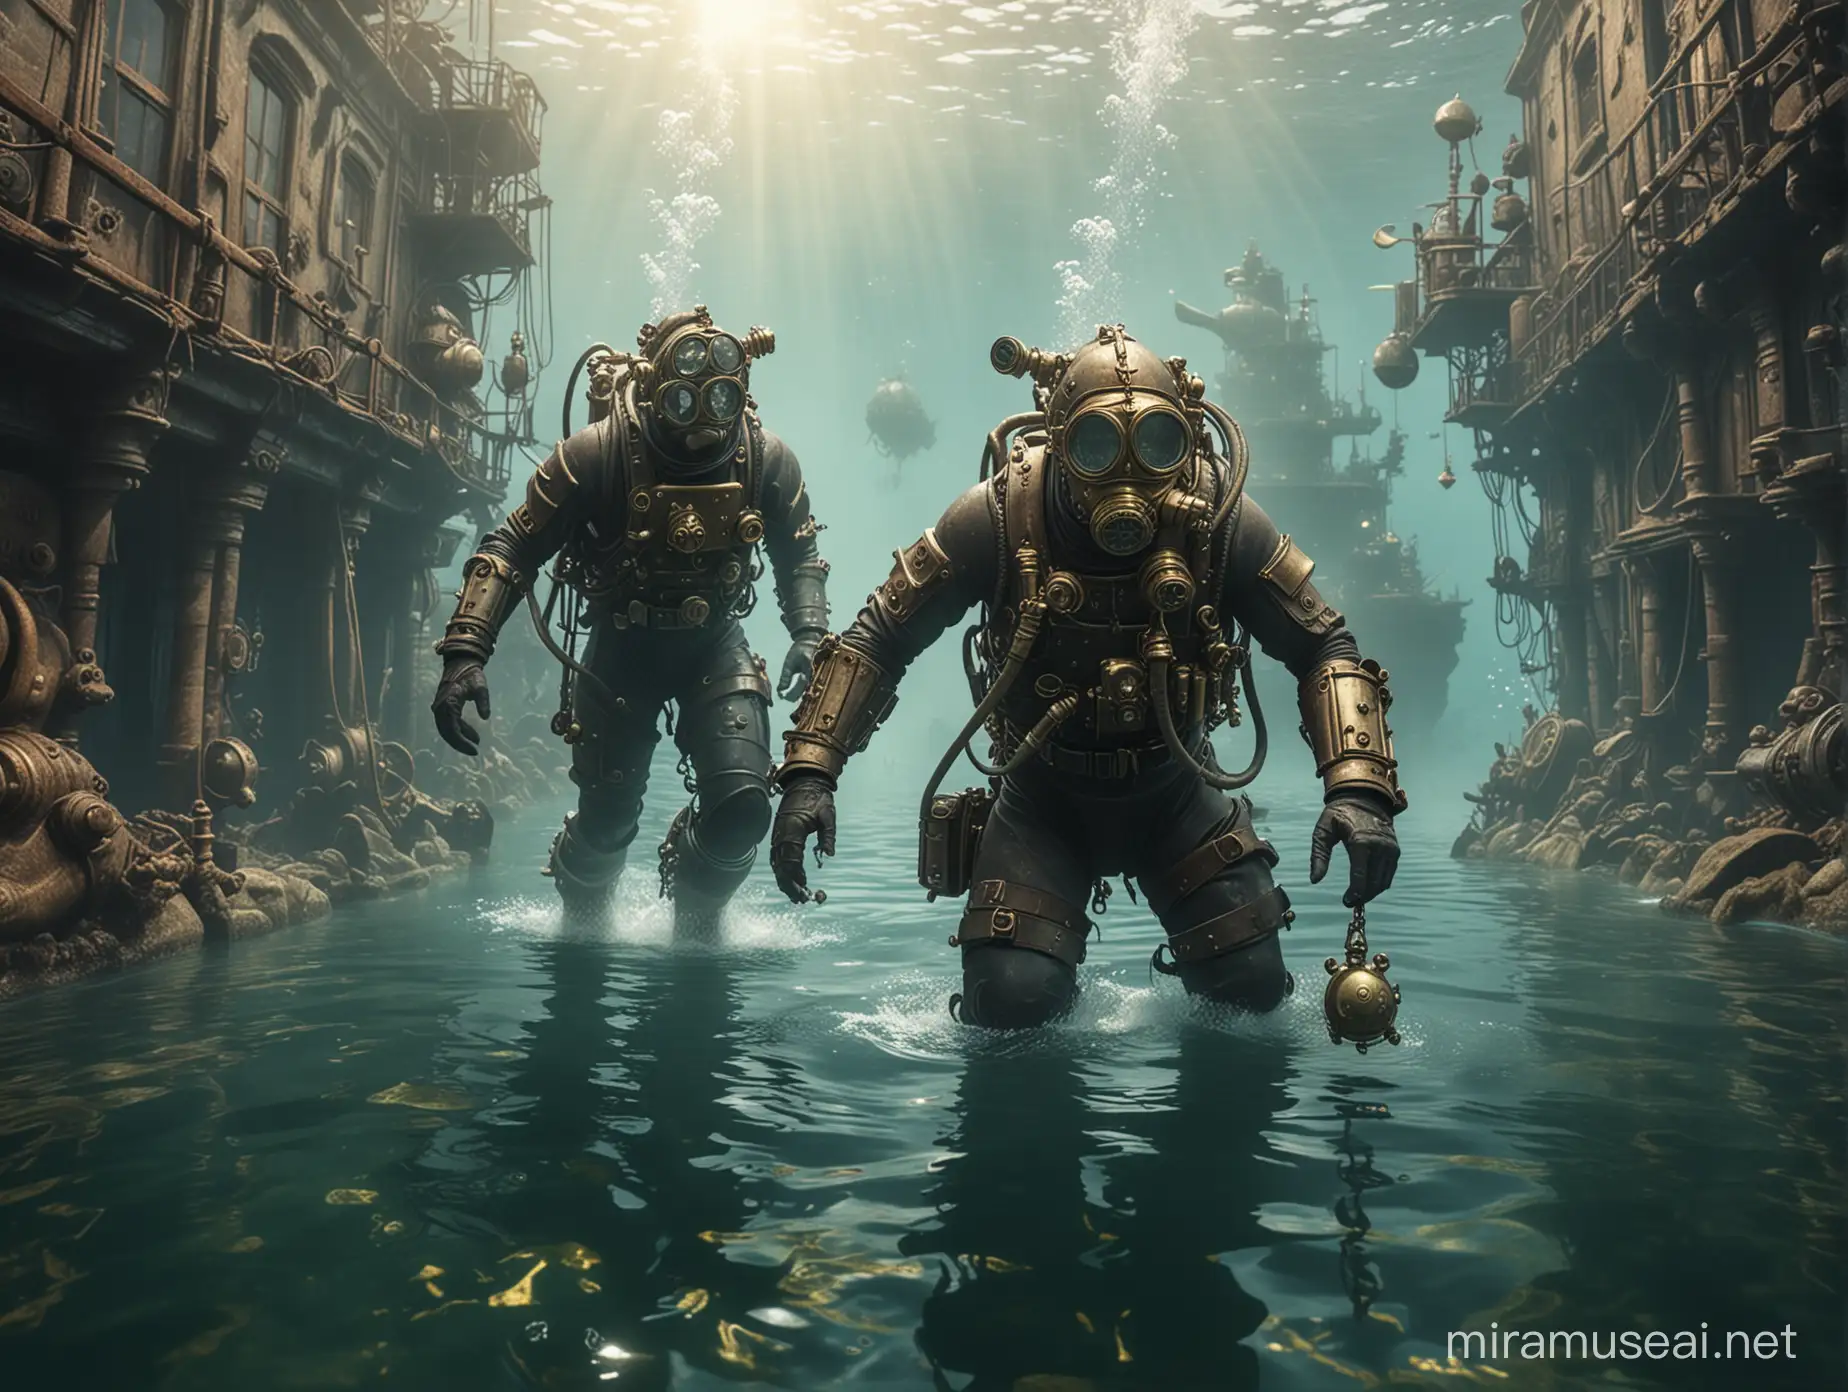 High definition photography, high quality, 8K Ultra HD, one steam punk diver, brass equipment, marching underwater searching for a treasure, discovering strange antique lost underwater city, sea monster attacking, blurred background, indirect light, photo realistic cinematic landscape